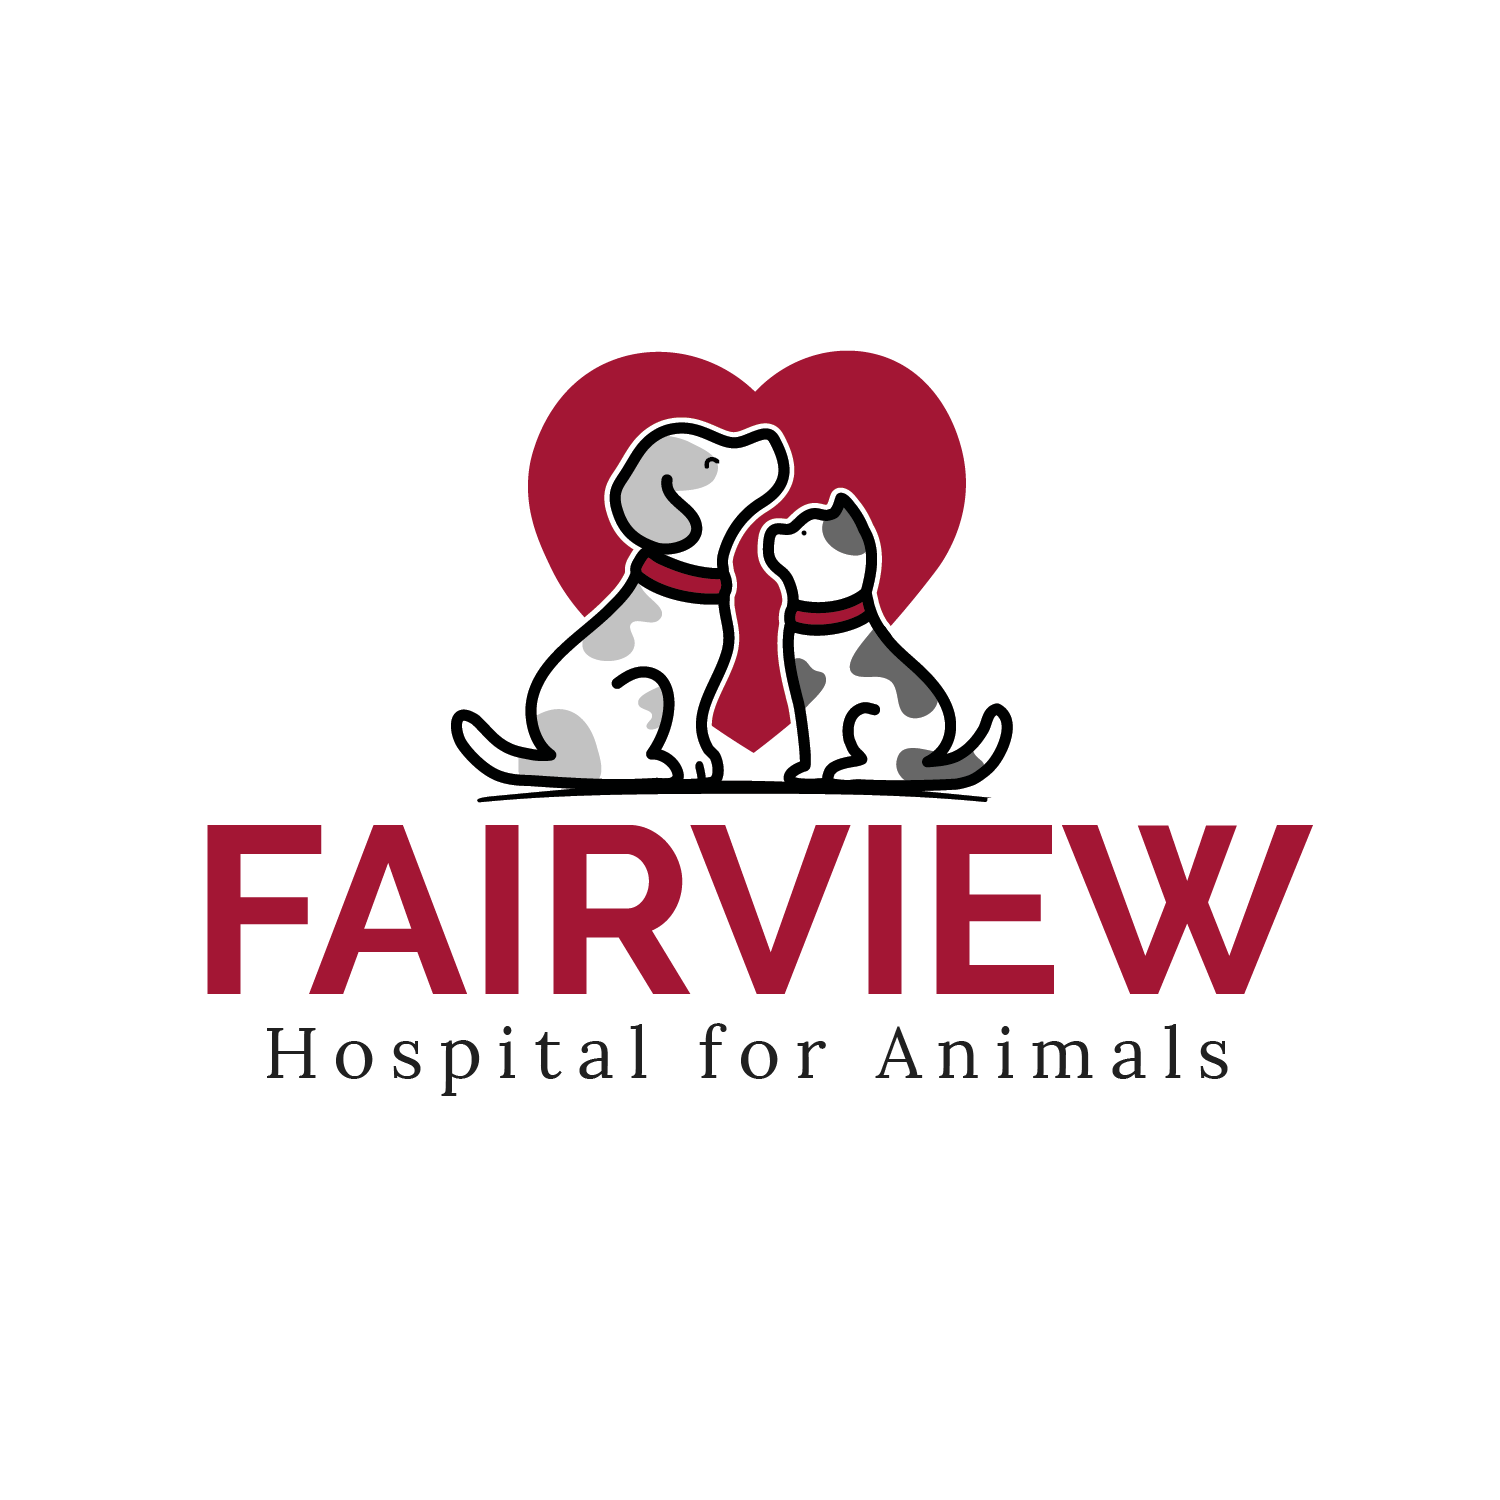 Fairview Hospital for Animals